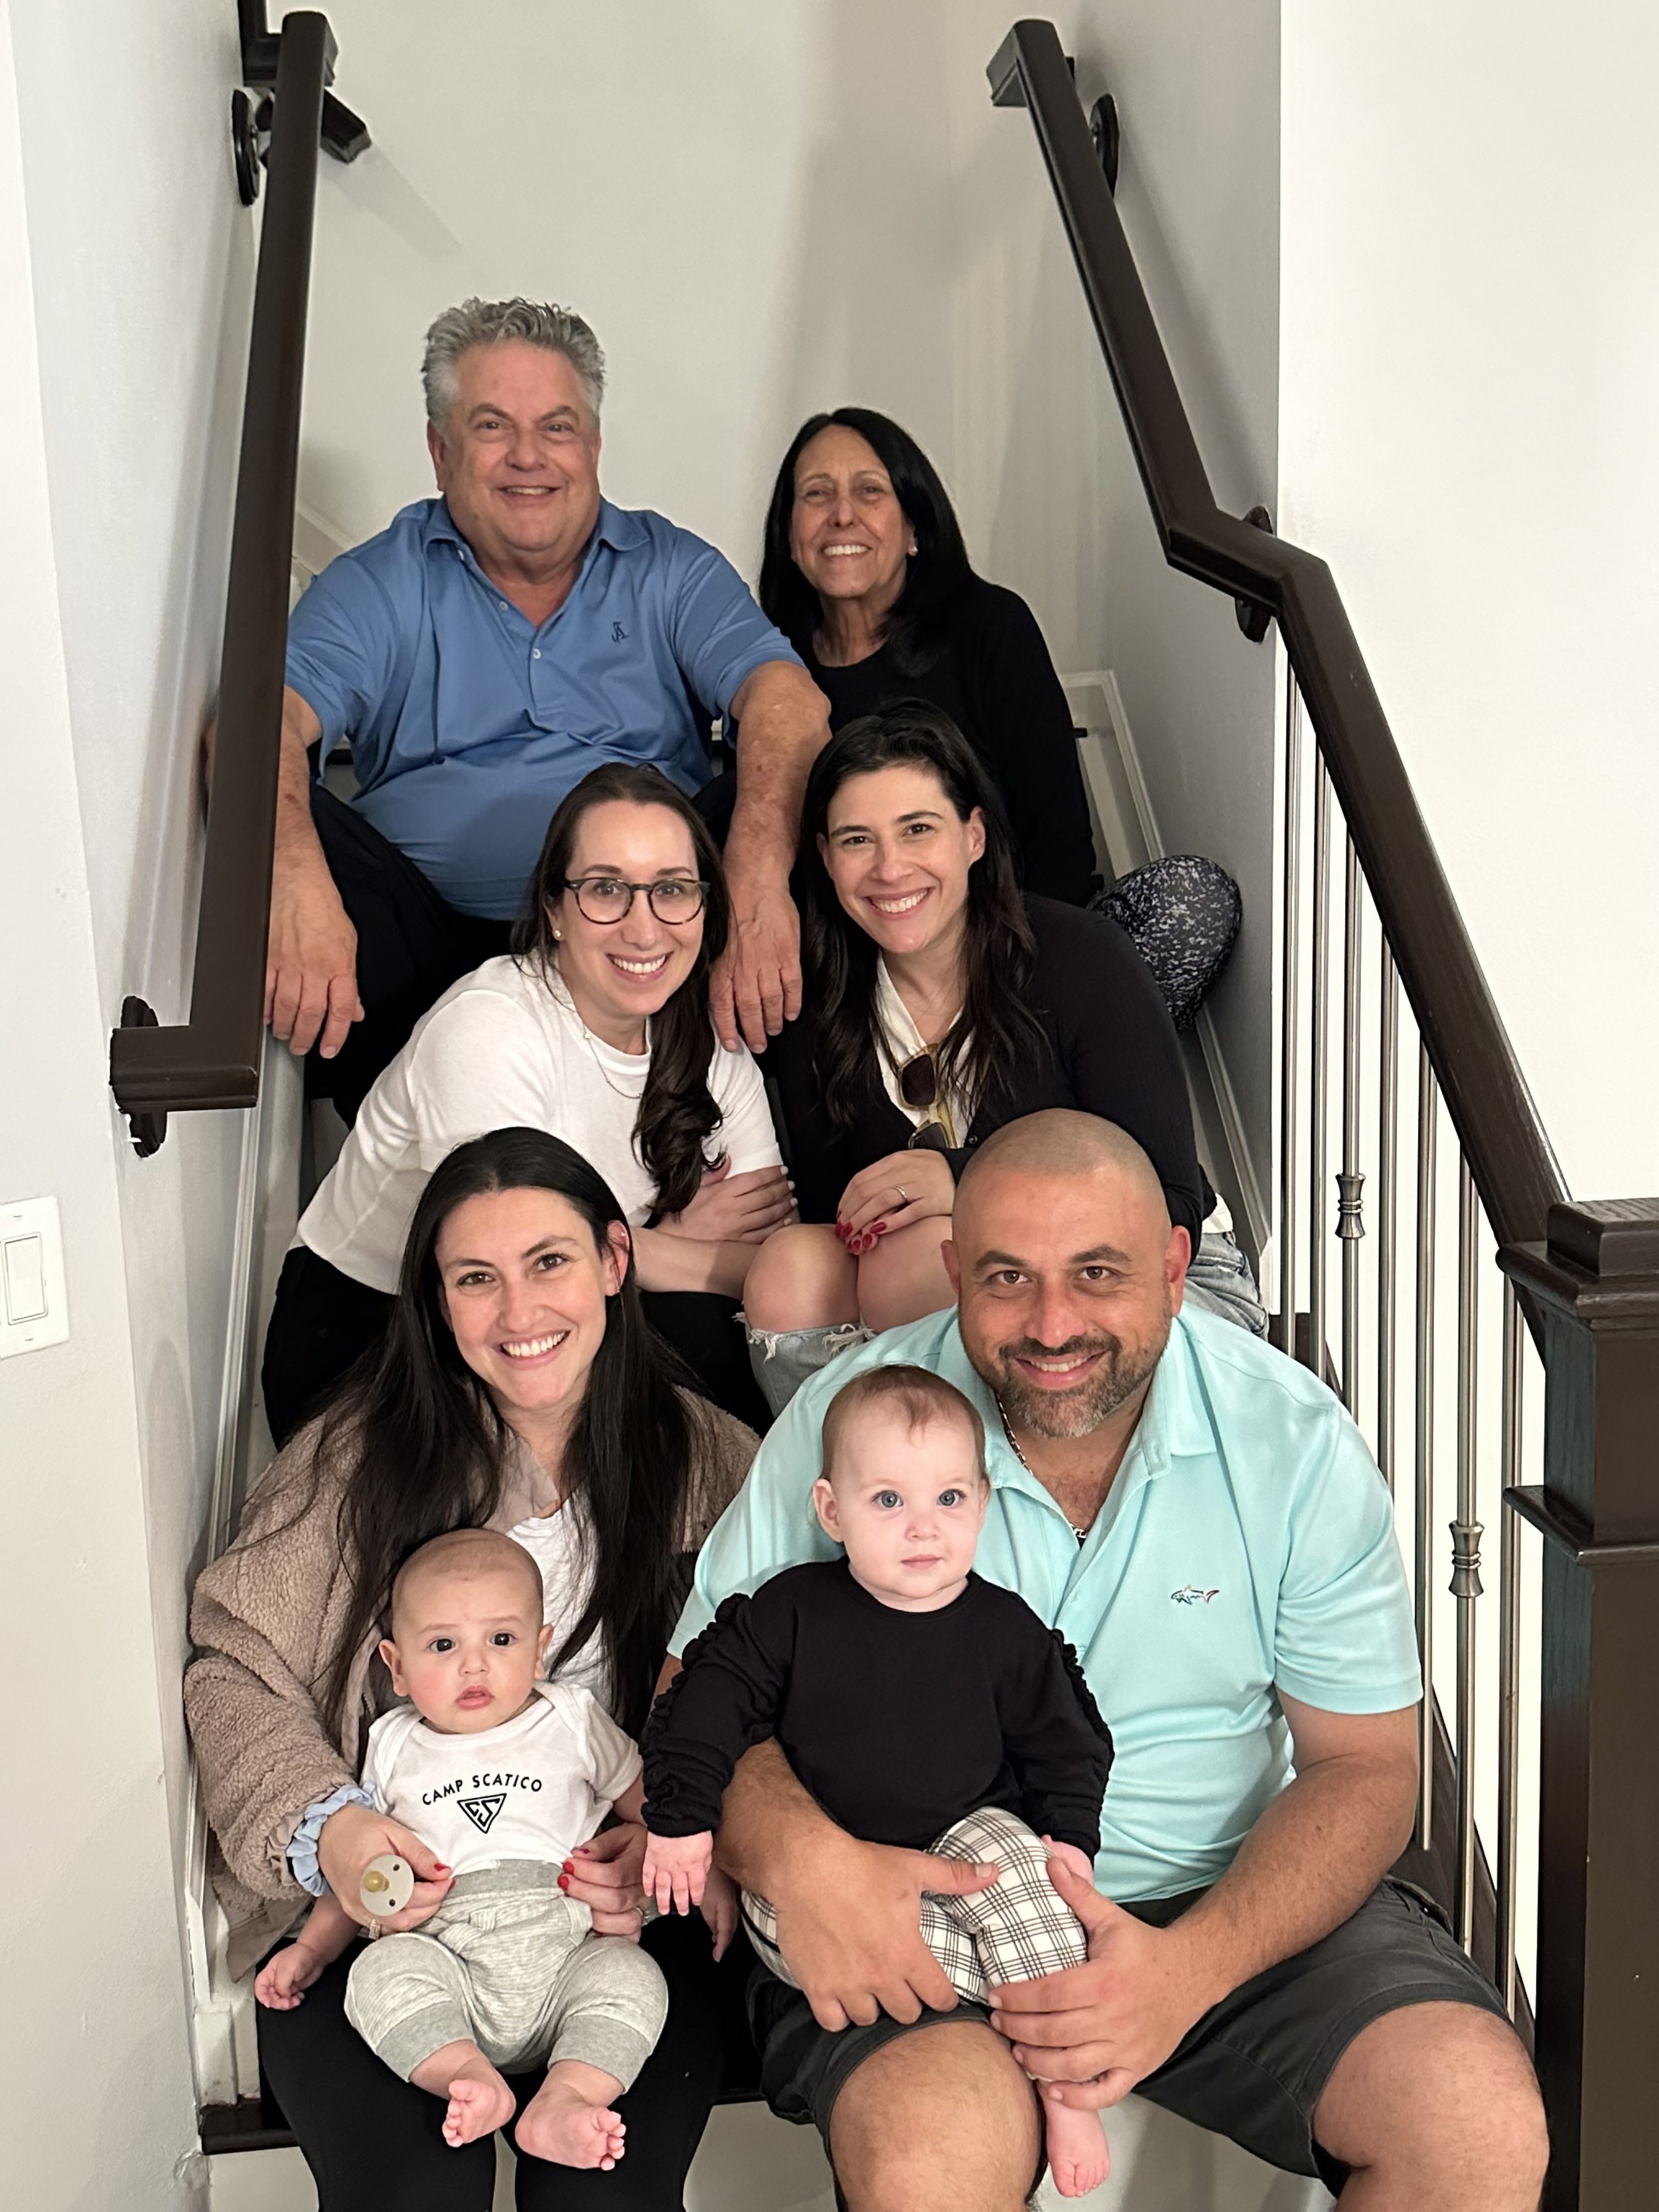  Boca Raton in January. When Robyn Mohr and Stefanie Bukantz (middle row) visited their bunkmate Jenni Levine, Jenni’s parents (Chas and Ellen) and brother Jason joined—along with the next generation, Harrison and Maddie. 